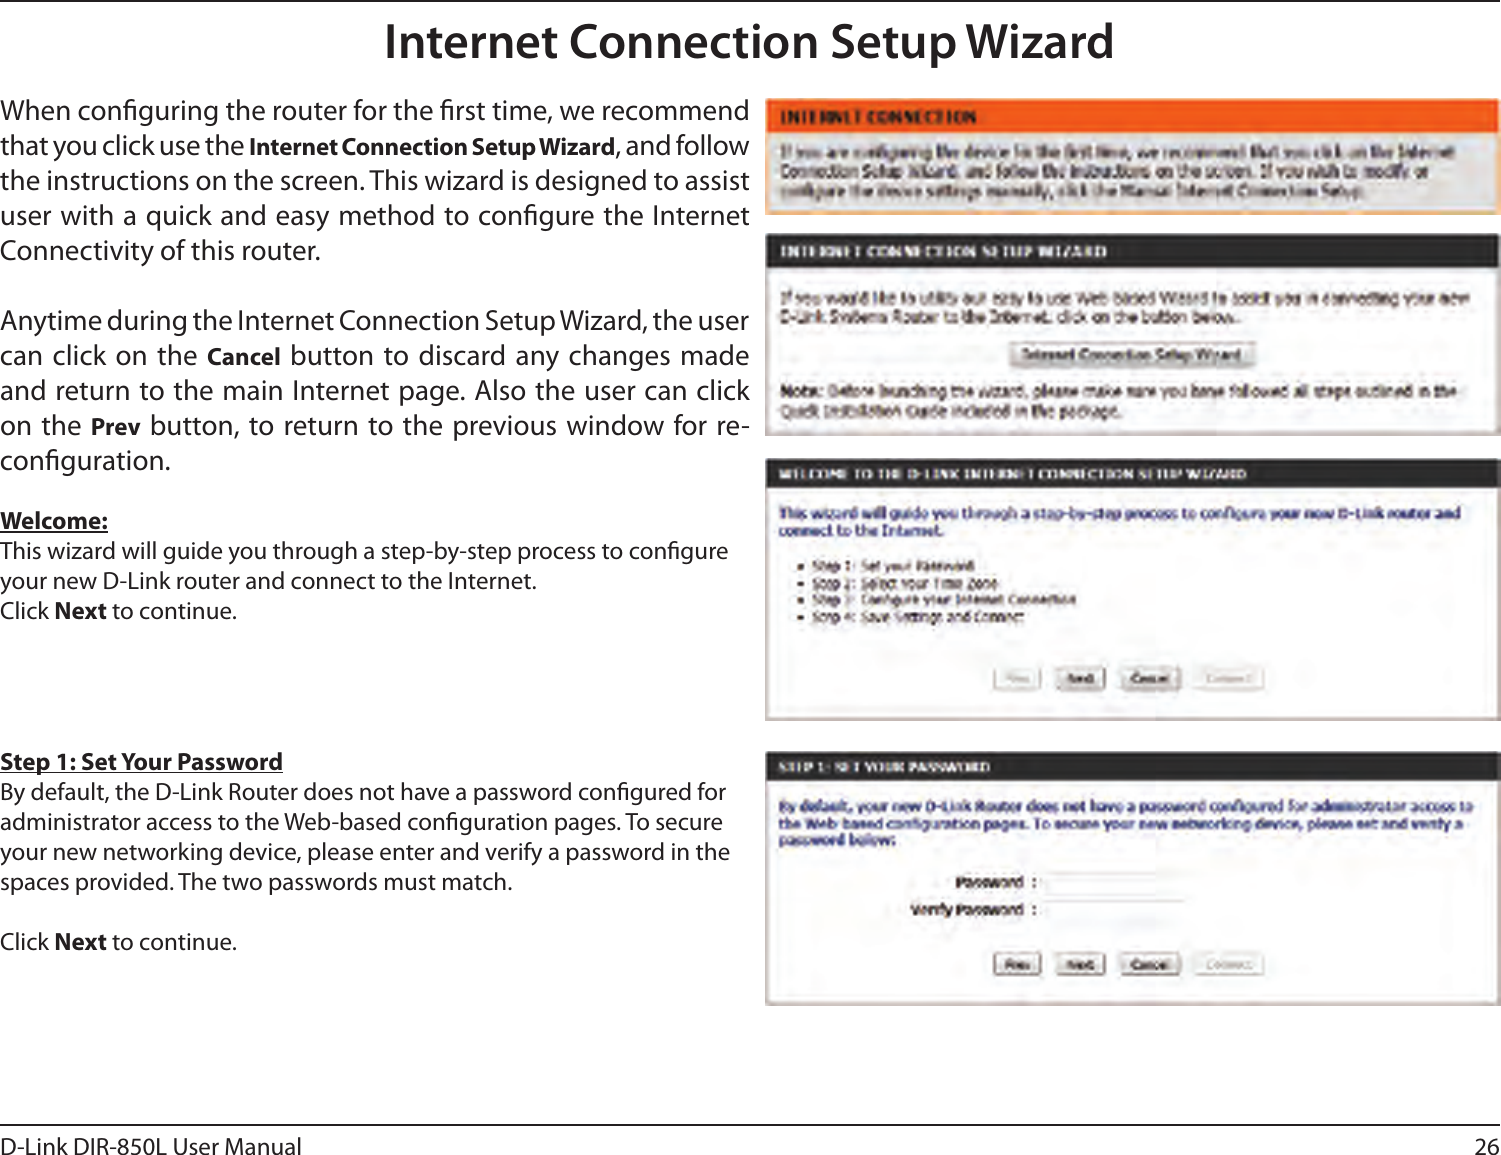 26D-Link DIR-850L User ManualInternet Connection Setup WizardWhen conguring the router for the rst time, we recommend that you click use the Internet Connection Setup Wizard, and follow the instructions on the screen. This wizard is designed to assist user with a quick and easy method to congure the Internet Connectivity of this router.Anytime during the Internet Connection Setup Wizard, the user can click on  the Cancel button to discard any changes made and return to the main Internet page. Also the user can click on the Prev button, to return to the previous window for re-conguration.Welcome:This wizard will guide you through a step-by-step process to congure your new D-Link router and connect to the Internet. Click Next to continue.Step 1: Set Your PasswordBy default, the D-Link Router does not have a password congured for administrator access to the Web-based conguration pages. To secure your new networking device, please enter and verify a password in the spaces provided. The two passwords must match.Click Next to continue.